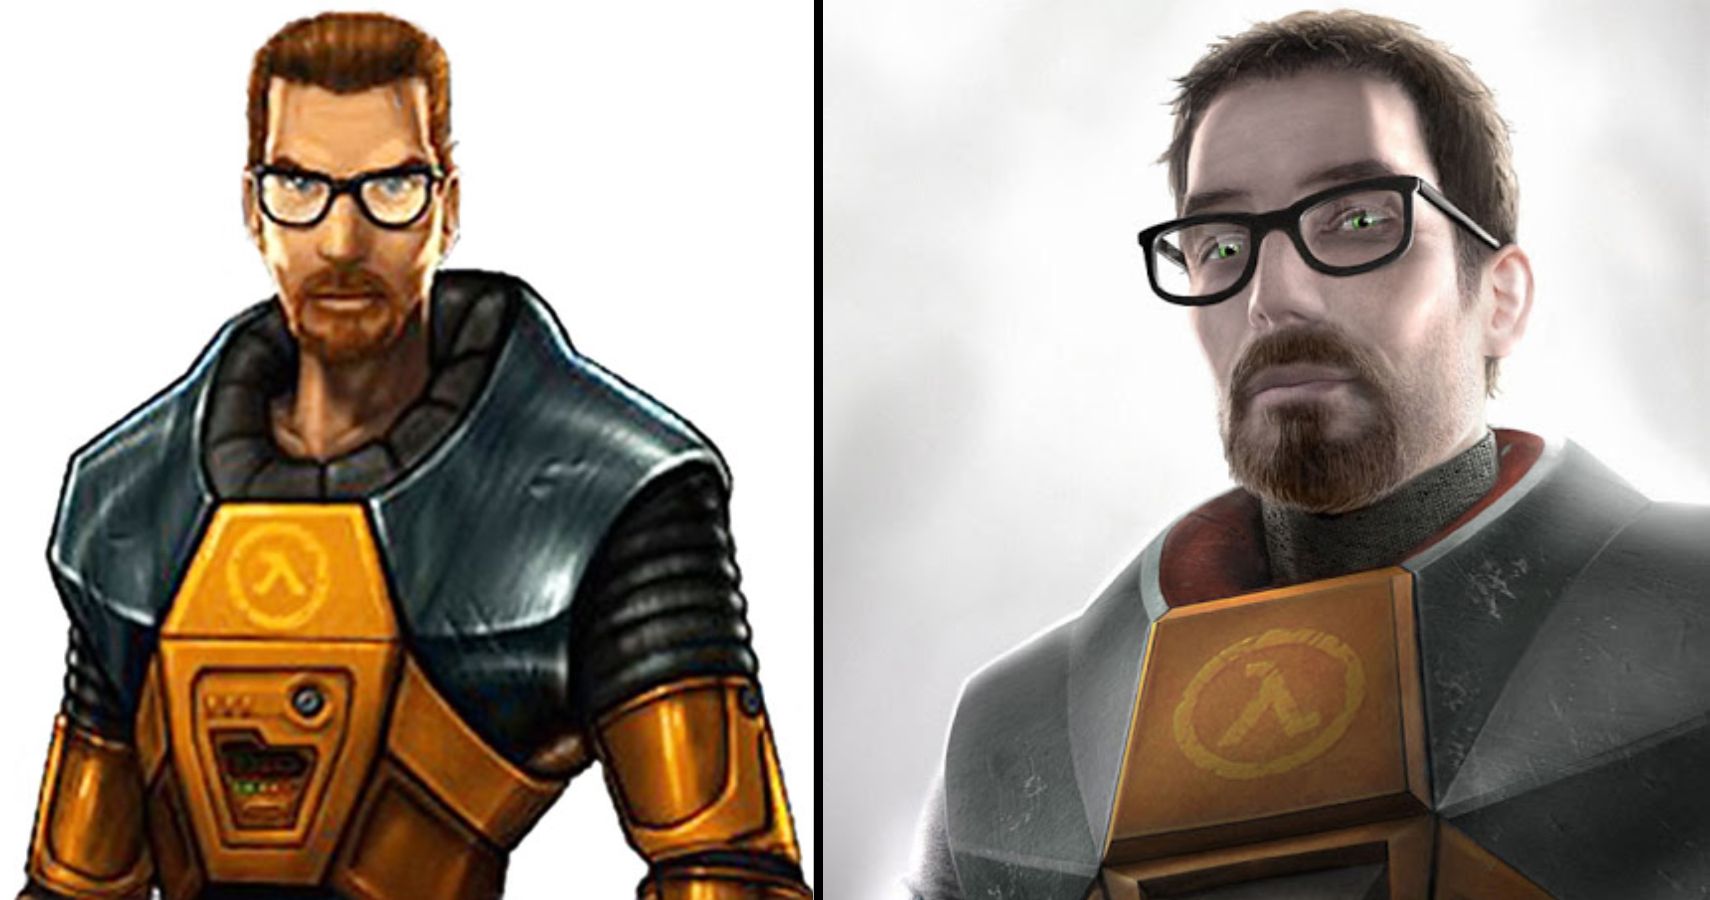 Gaming Detail HalfLife 2 Easter Egg Pays Homage To The First Game